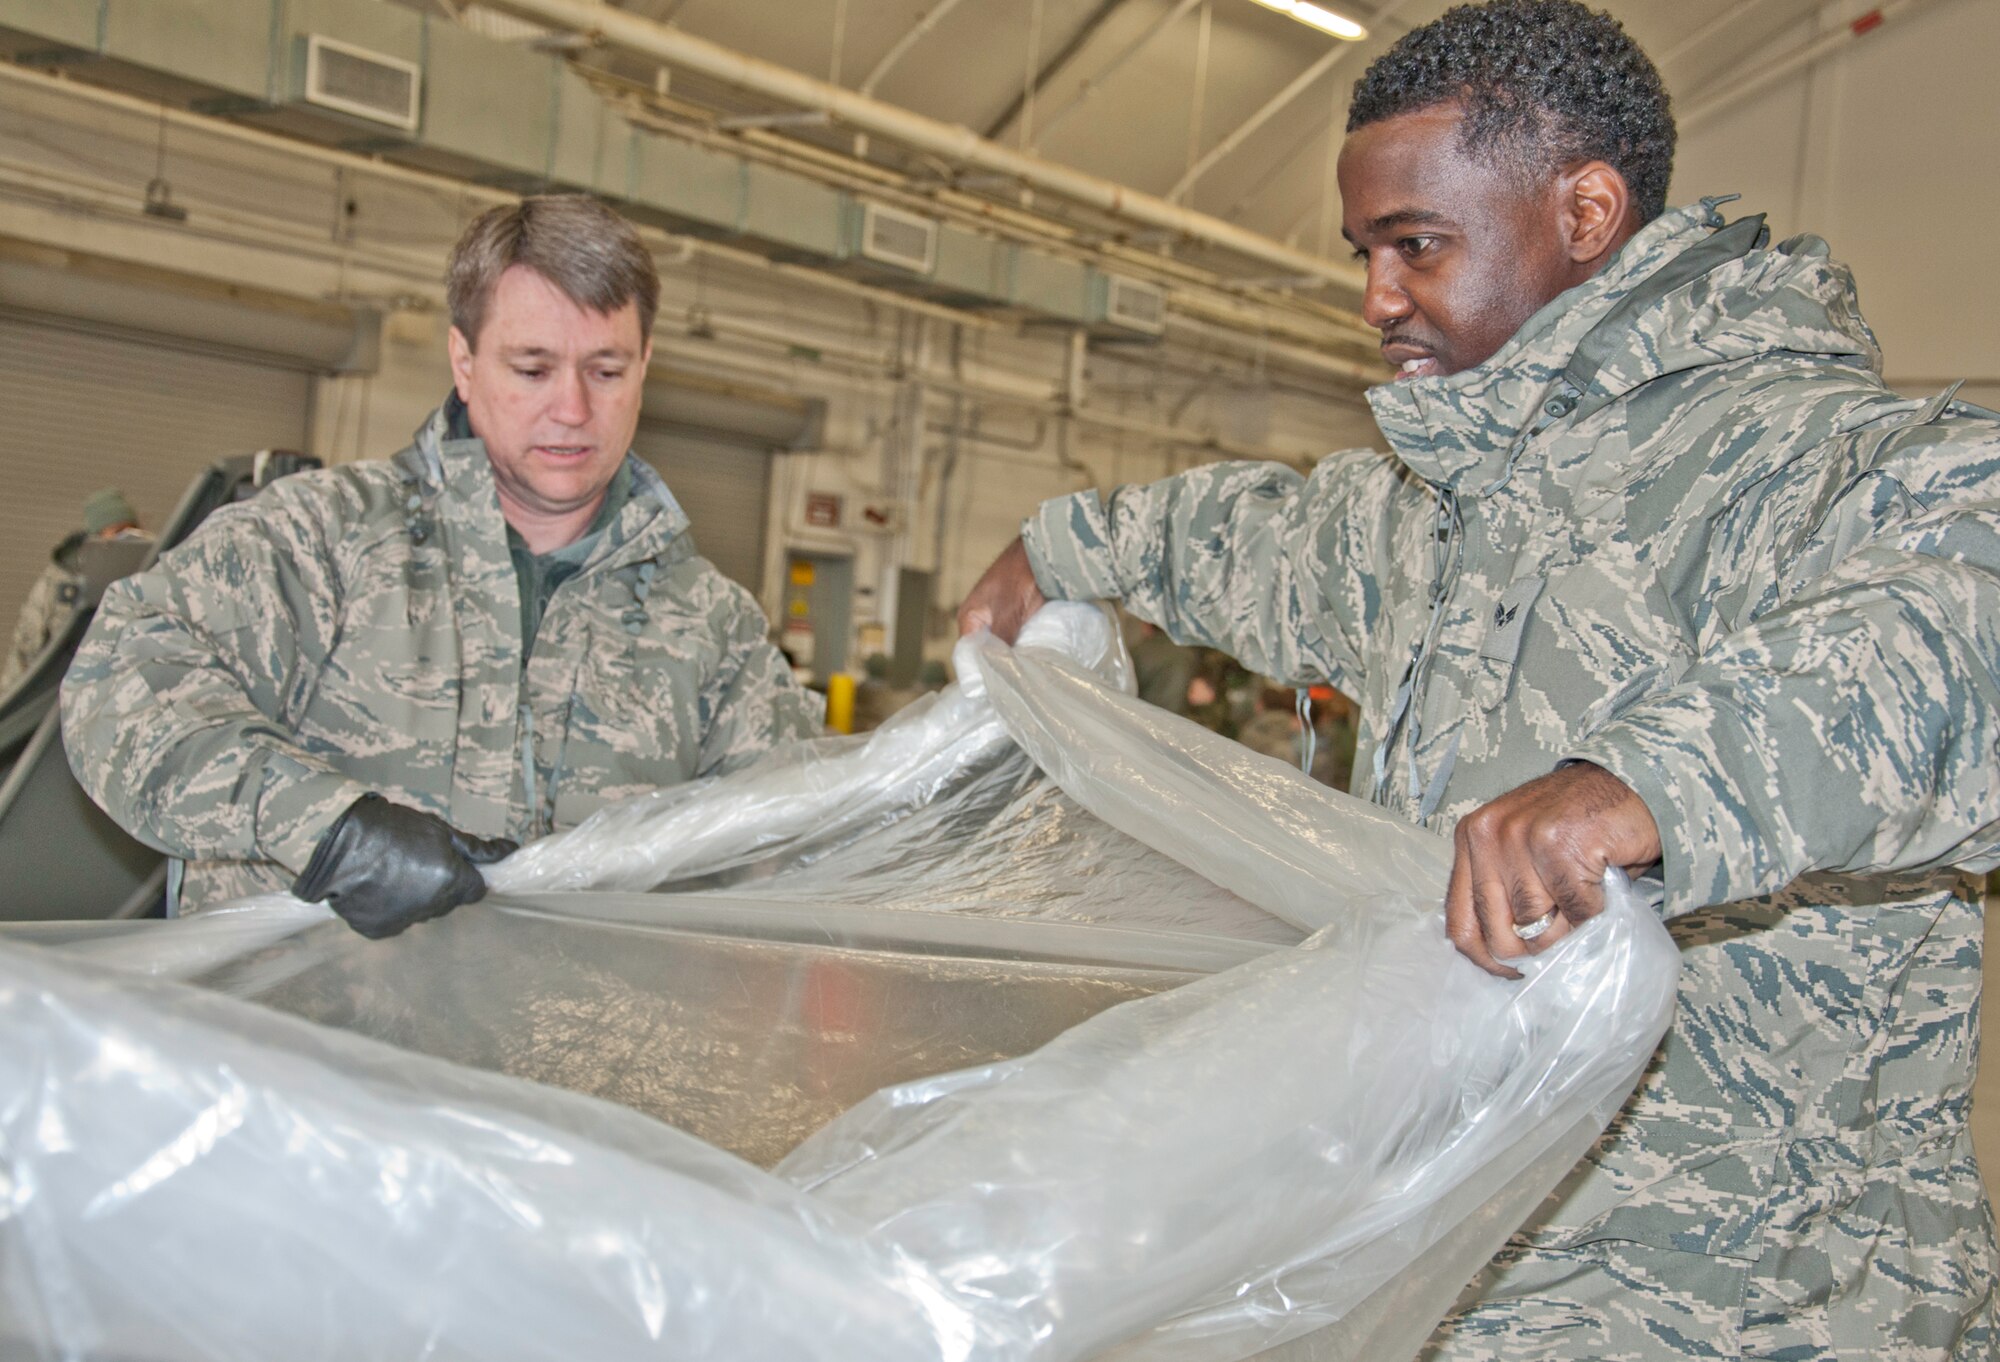 JOINT BASE ANDREWS, Md. -- Tech. Sgt. Steven Hensley (left), 459th Communications Flight knowledge operations specialist, and Senior Airman Joseph Taylor, 459th Air Refueling wing financial management specialist, learn how to protect equipment from chemical contamination during readiness and Ability to Survive and Operate training here Feb. 4. The 459 ARW attended 14 different readiness and ATSO courses over a two-day period that were focused on preparing them for exercises and an upcoming Operational Readiness Inspection. (U.S. Air Force photo/Staff Sgt. Sophia Piellusch)